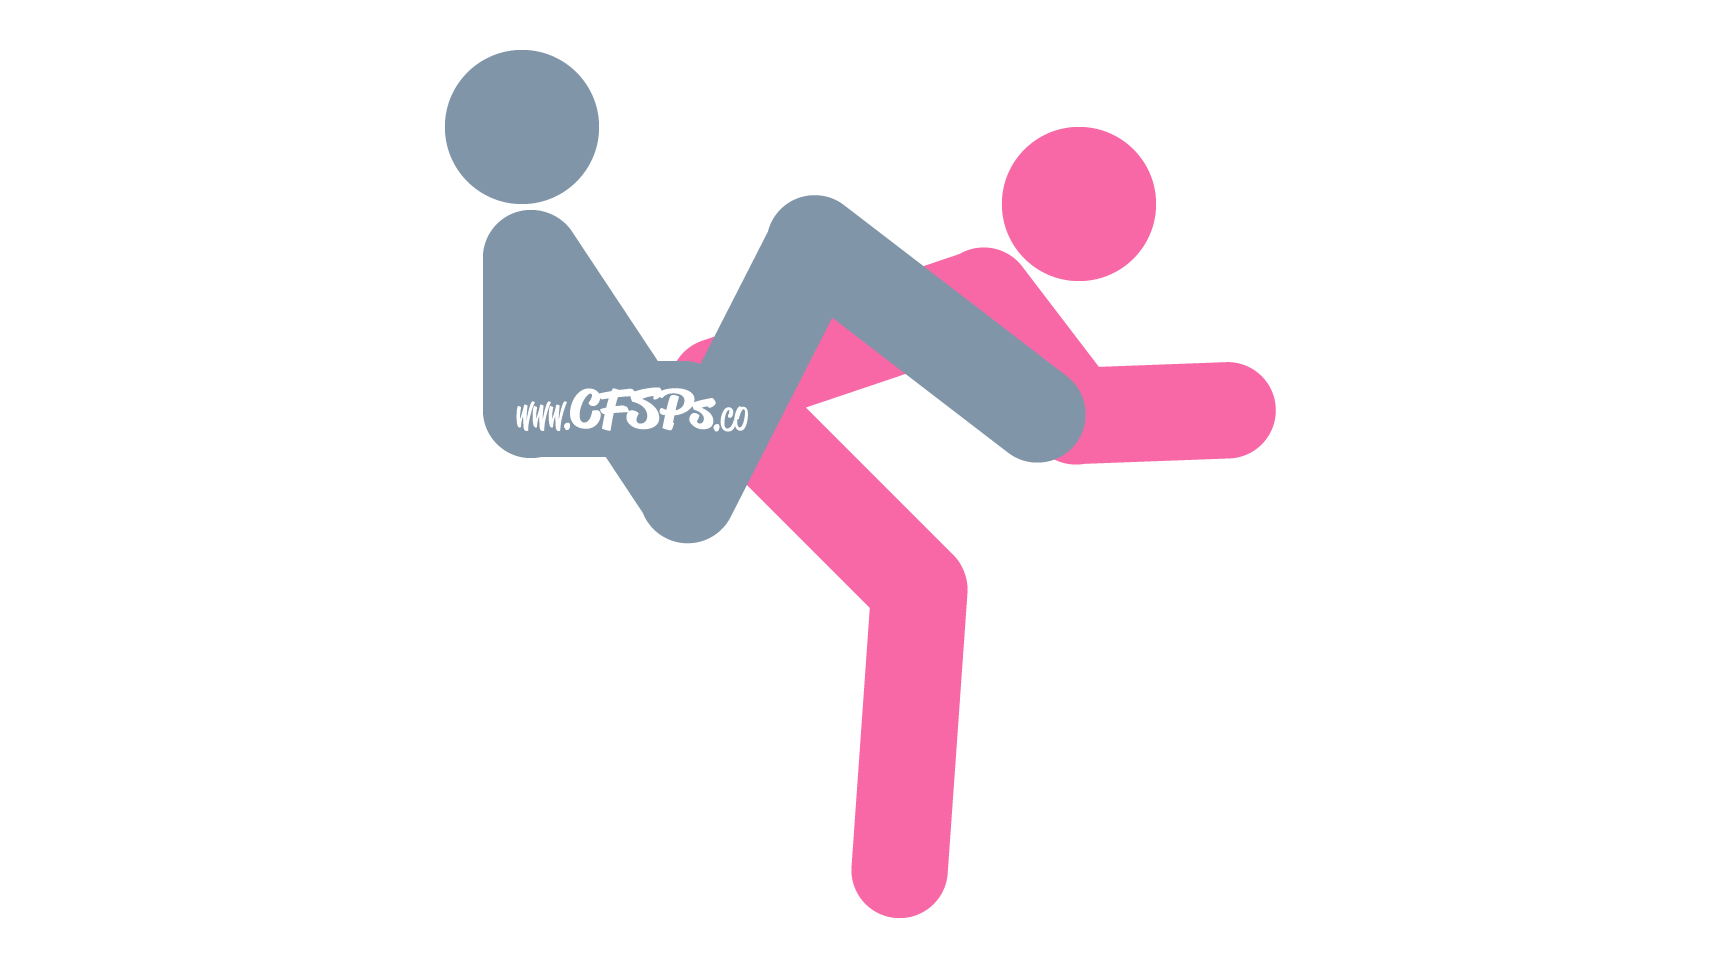 This stick figure image depicts a man and woman having sex in the Hind-quarterly Reciew sex position. The man is sitting in a desk chair with his legs open and feet on the edge of the desk. The woman is sitting on his pelvis while facing away from him, leaning onto the desk and supporting herself with her elbows.